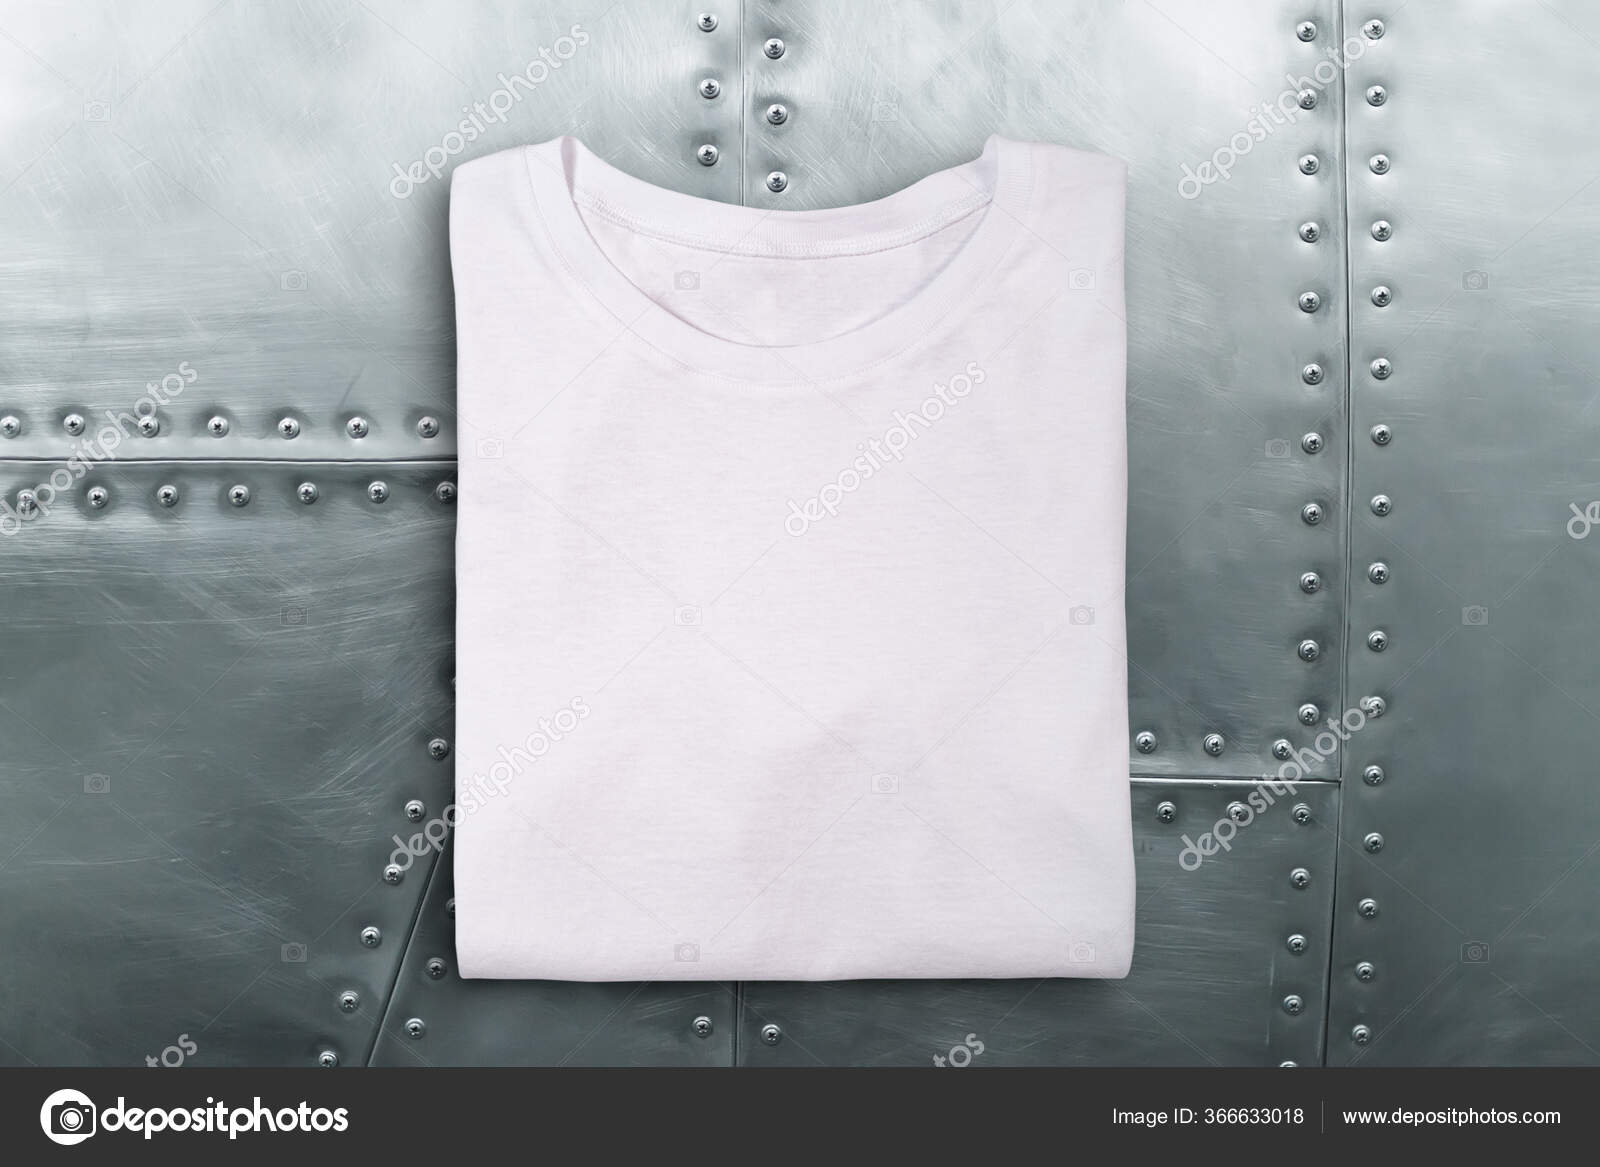 Download White Folded T Shirt On Metal Texture Blank White Tshirt On Metal Background Stock Photo Image By C Dmitry Zimin 366633018